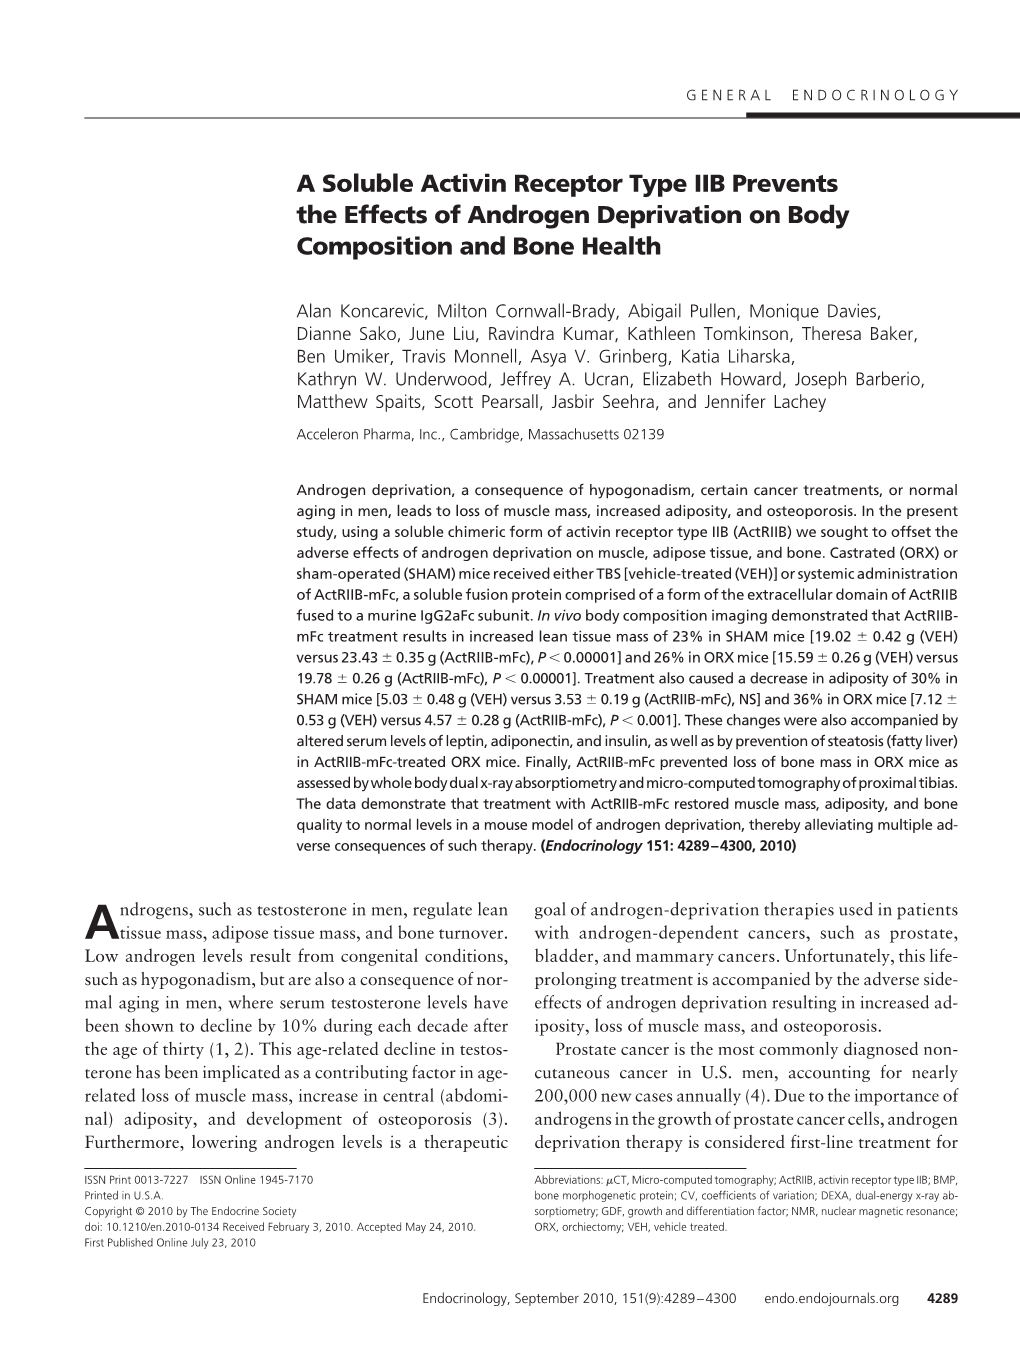 A Soluble Activin Receptor Type IIB Prevents the Effects of Androgen Deprivation on Body Composition and Bone Health